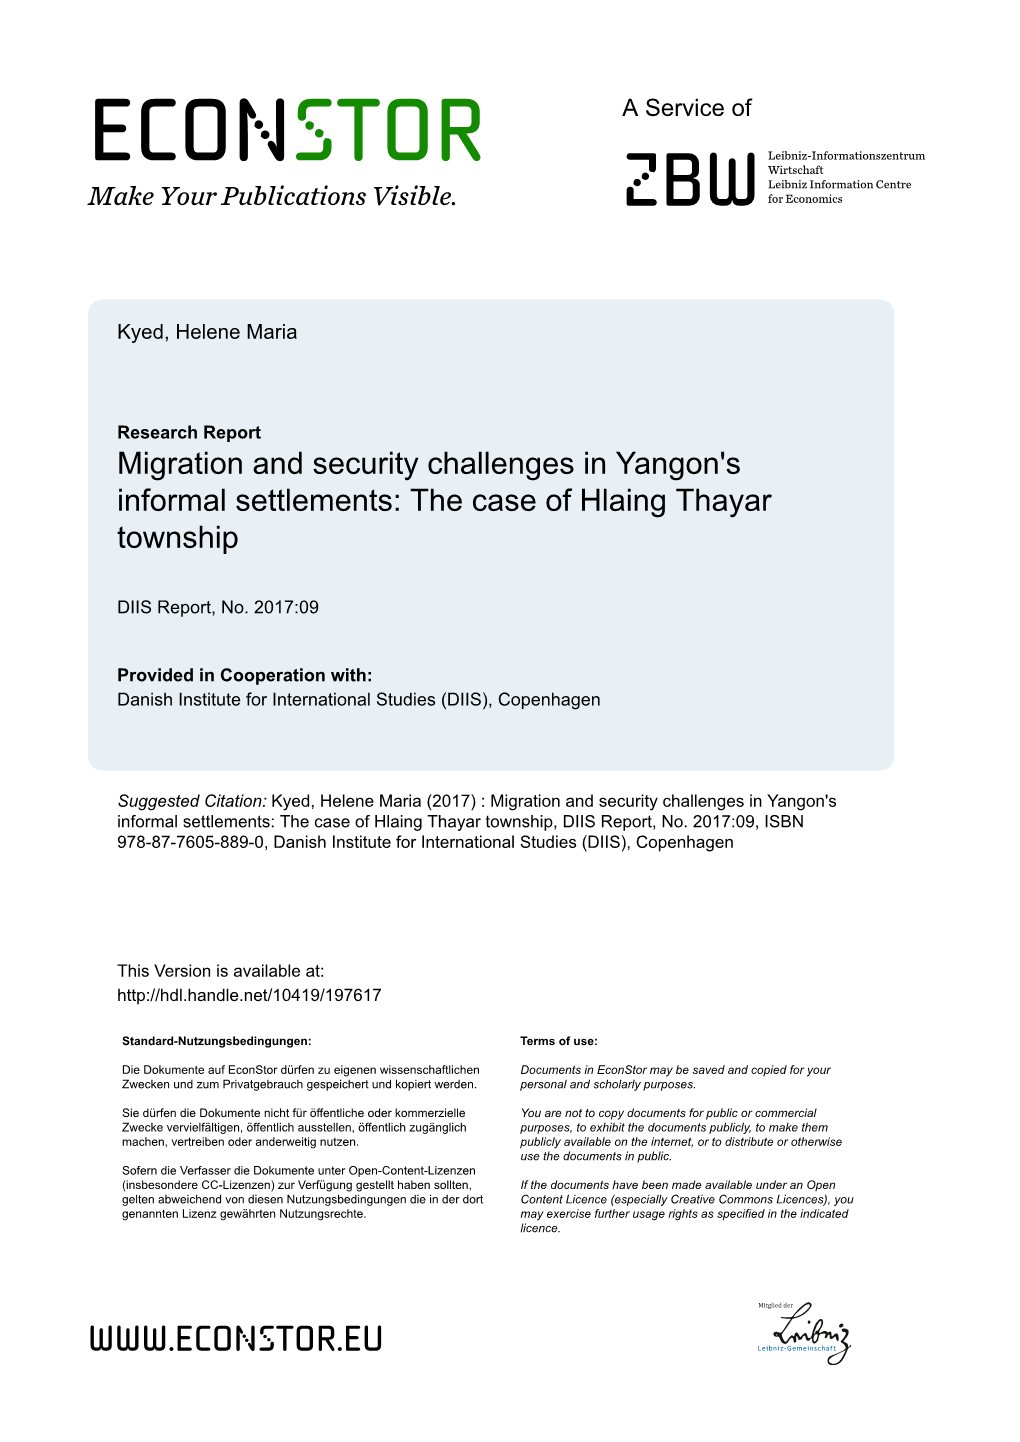 Migration and Security Challenges in Yangon's Informal Settlements: the Case of Hlaing Thayar Township